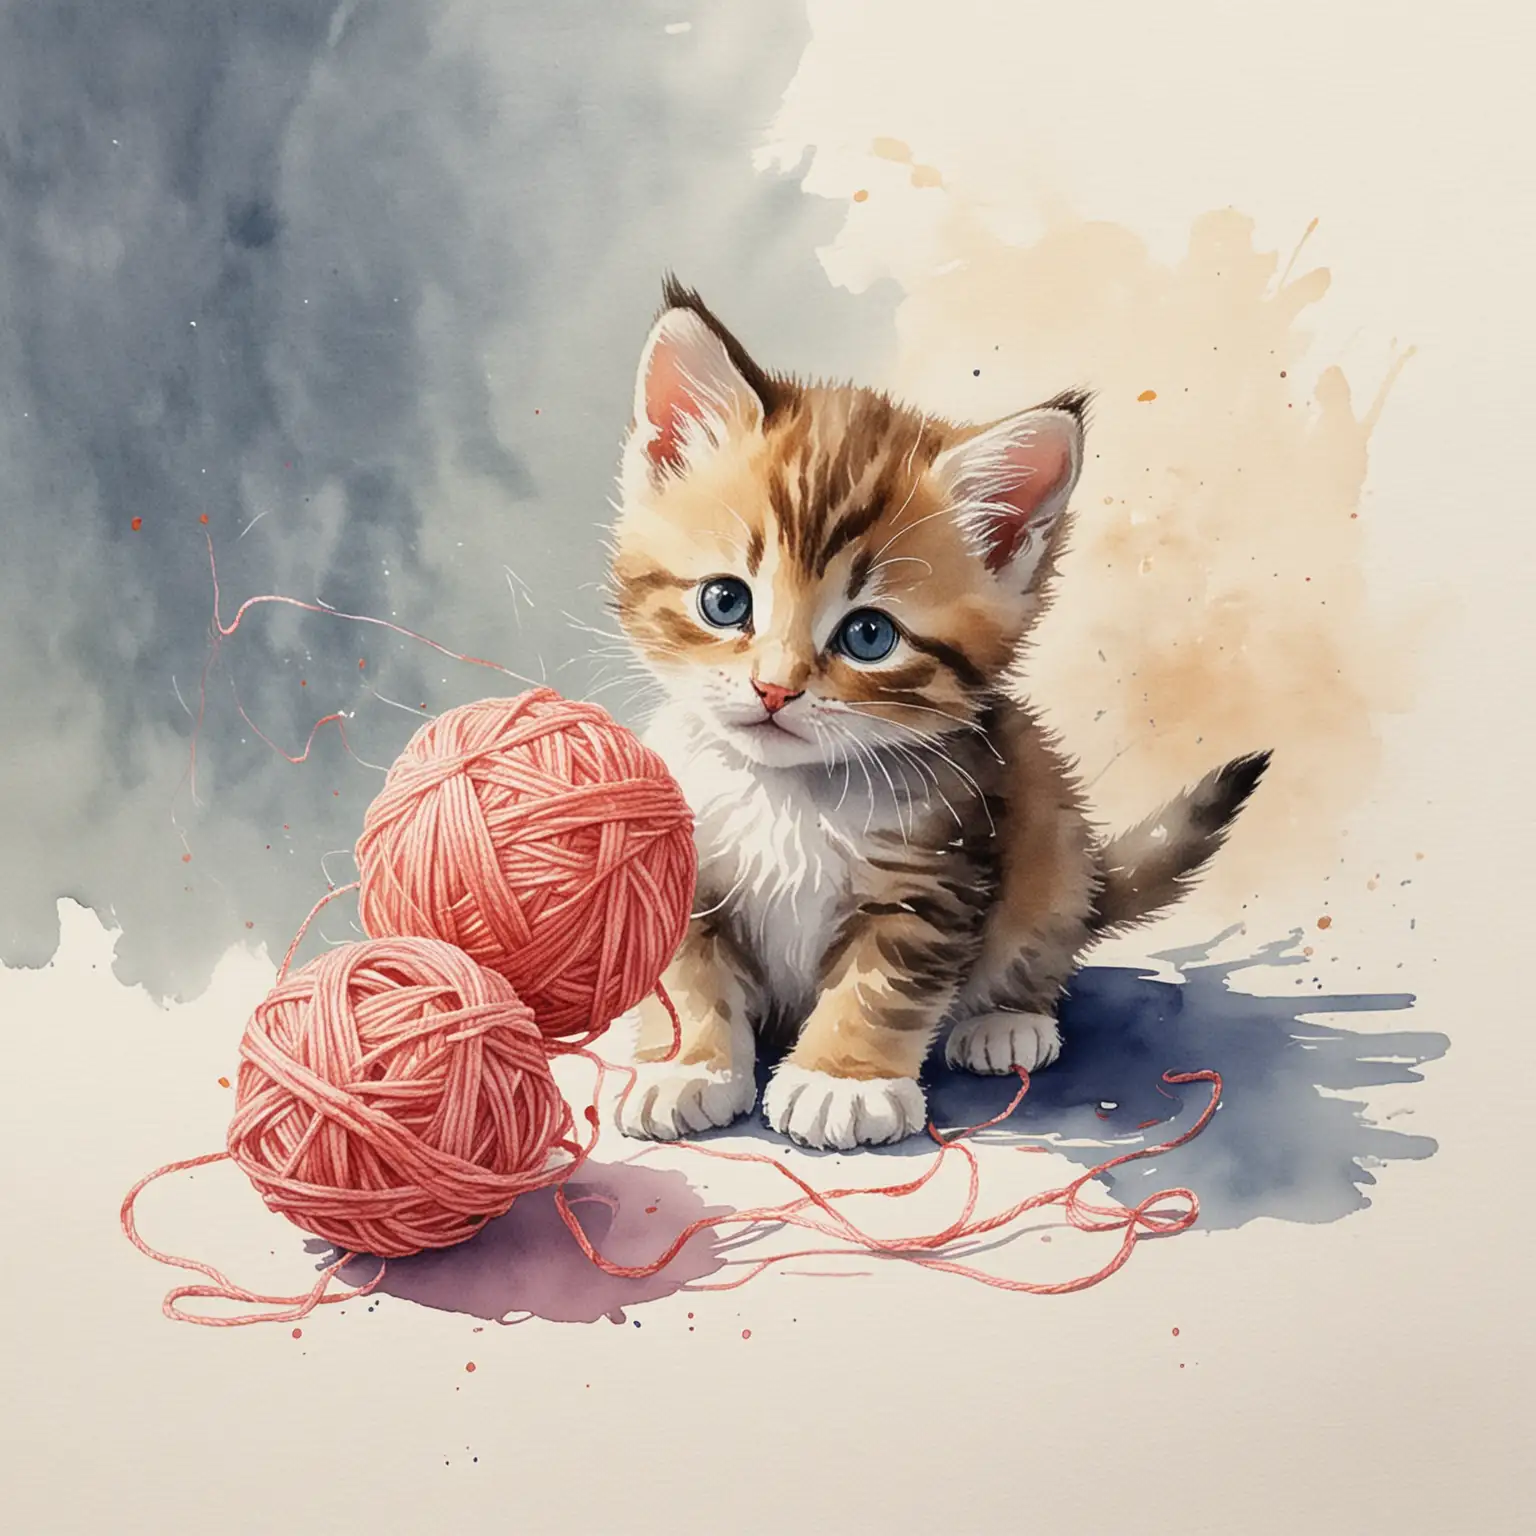 Adorable Kitten Playing with Colorful Yarn in a Whimsical Watercolor Scene